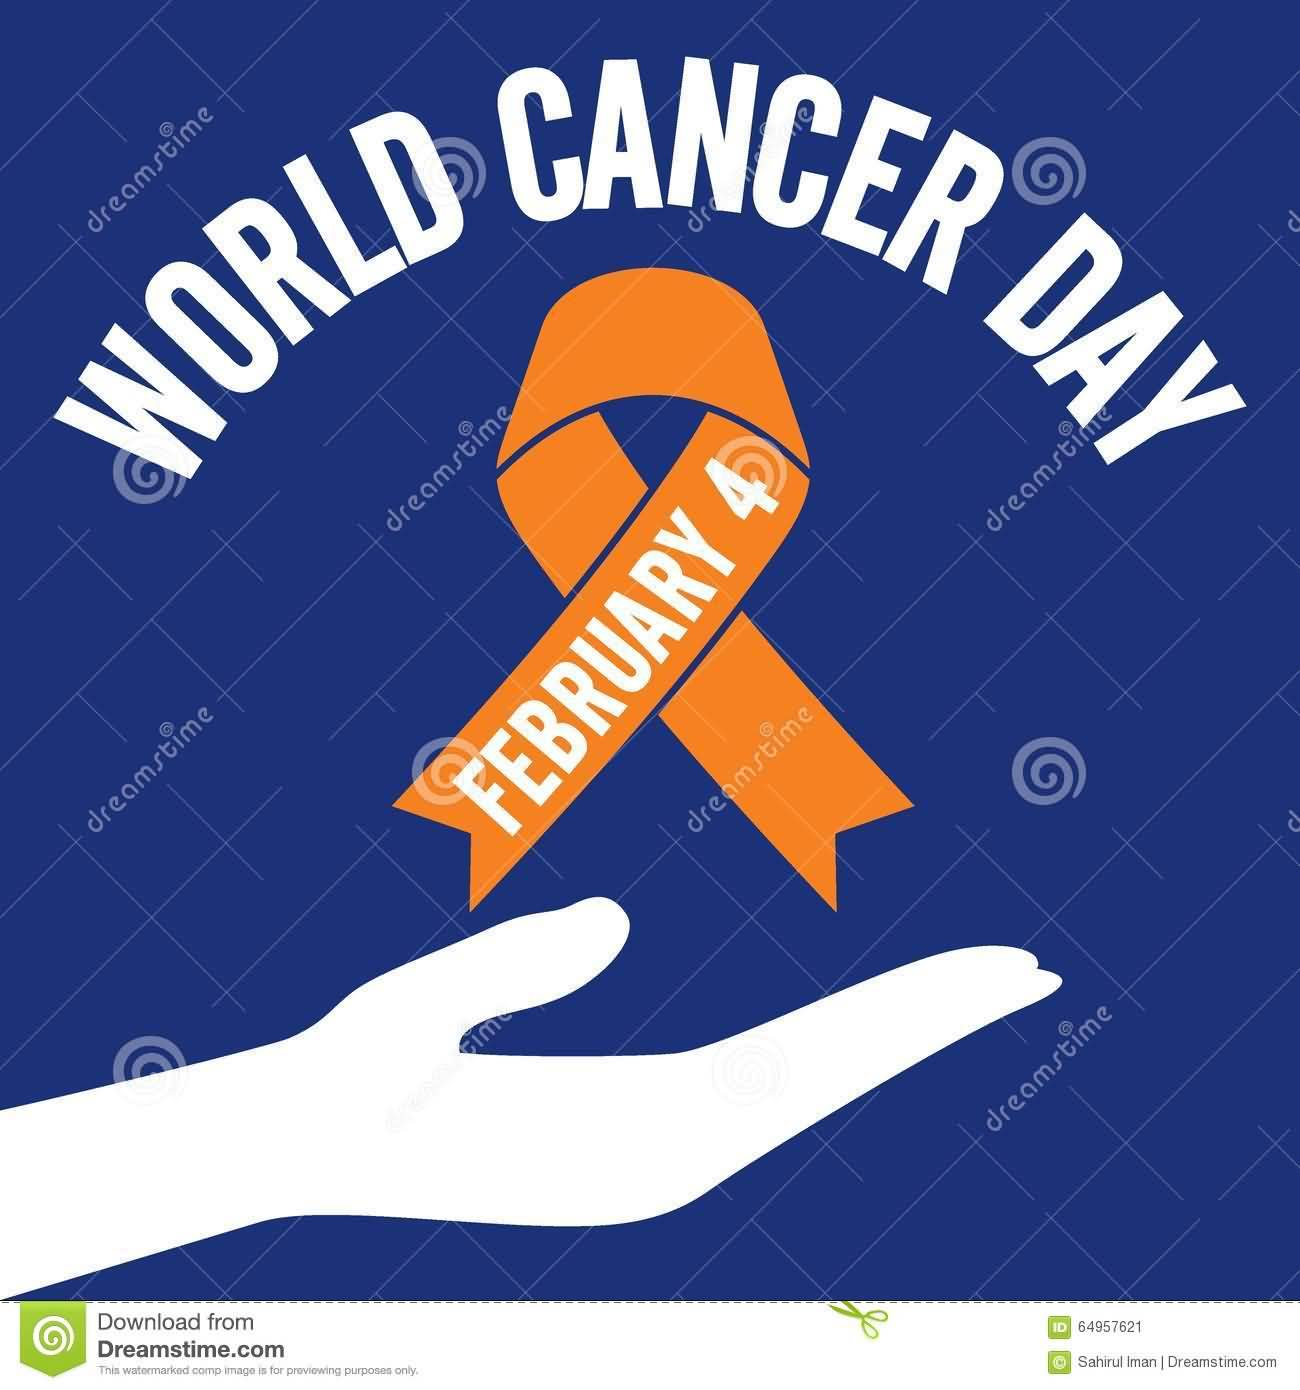 World Cancer Day February 4 Ribbon And Hand Illustration